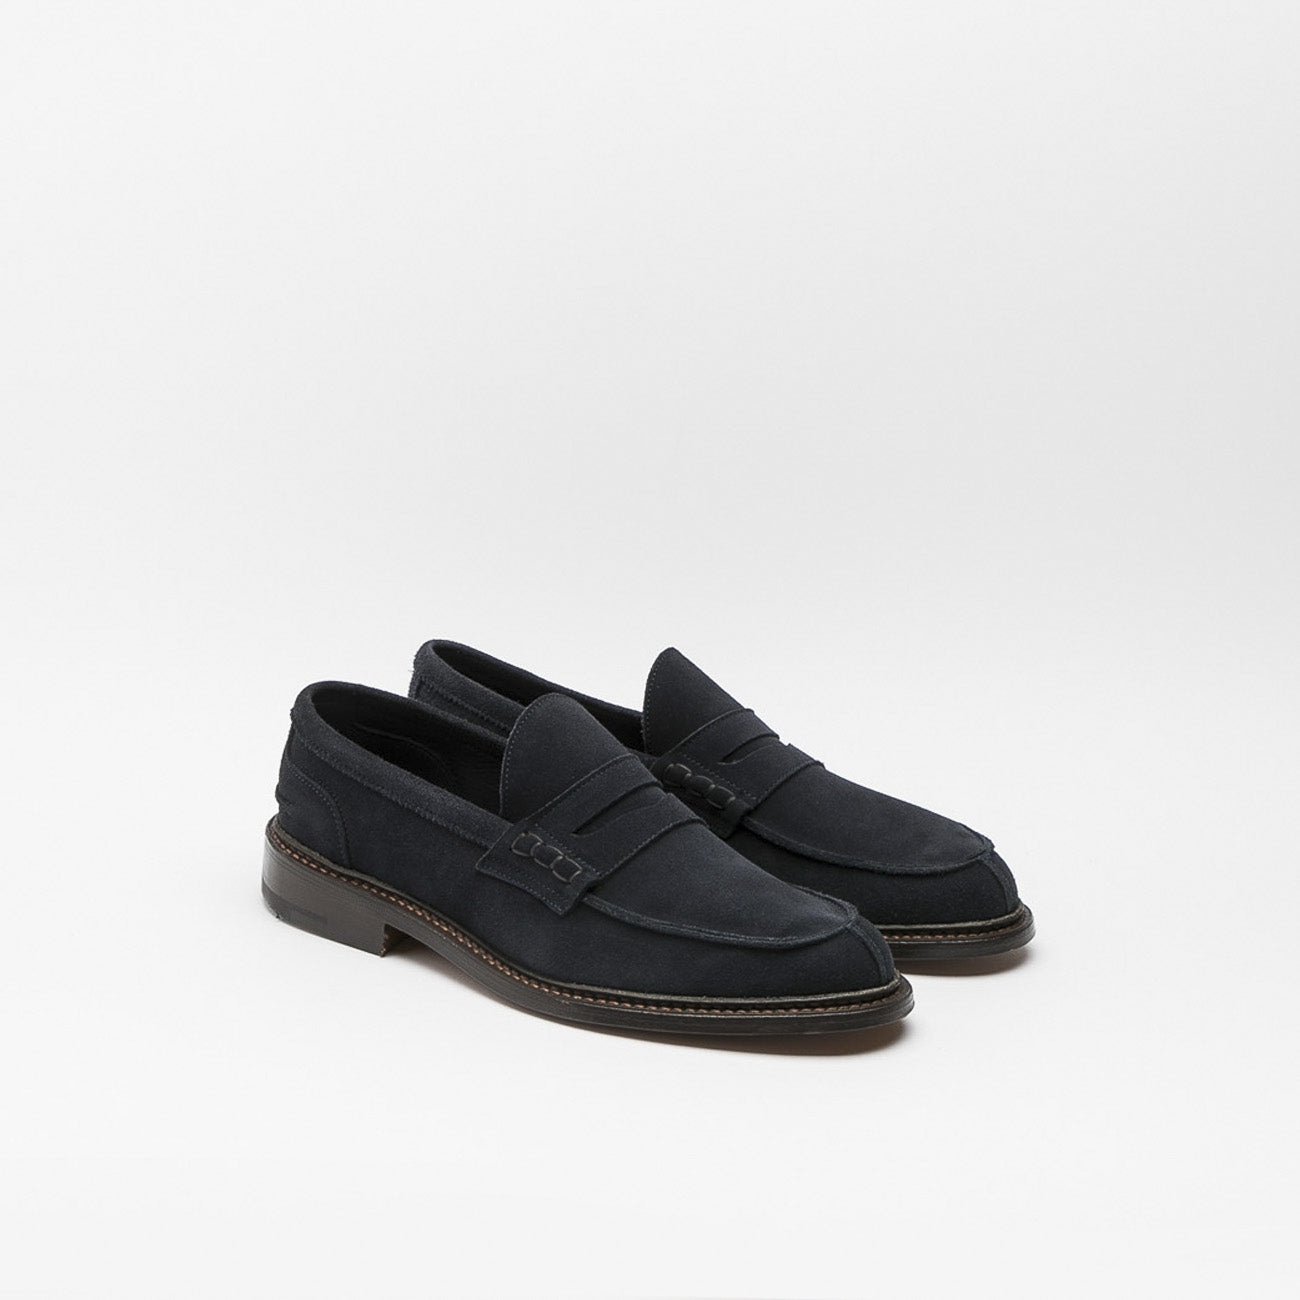 Tricker's Adam penny loafer moccasin in blue suede